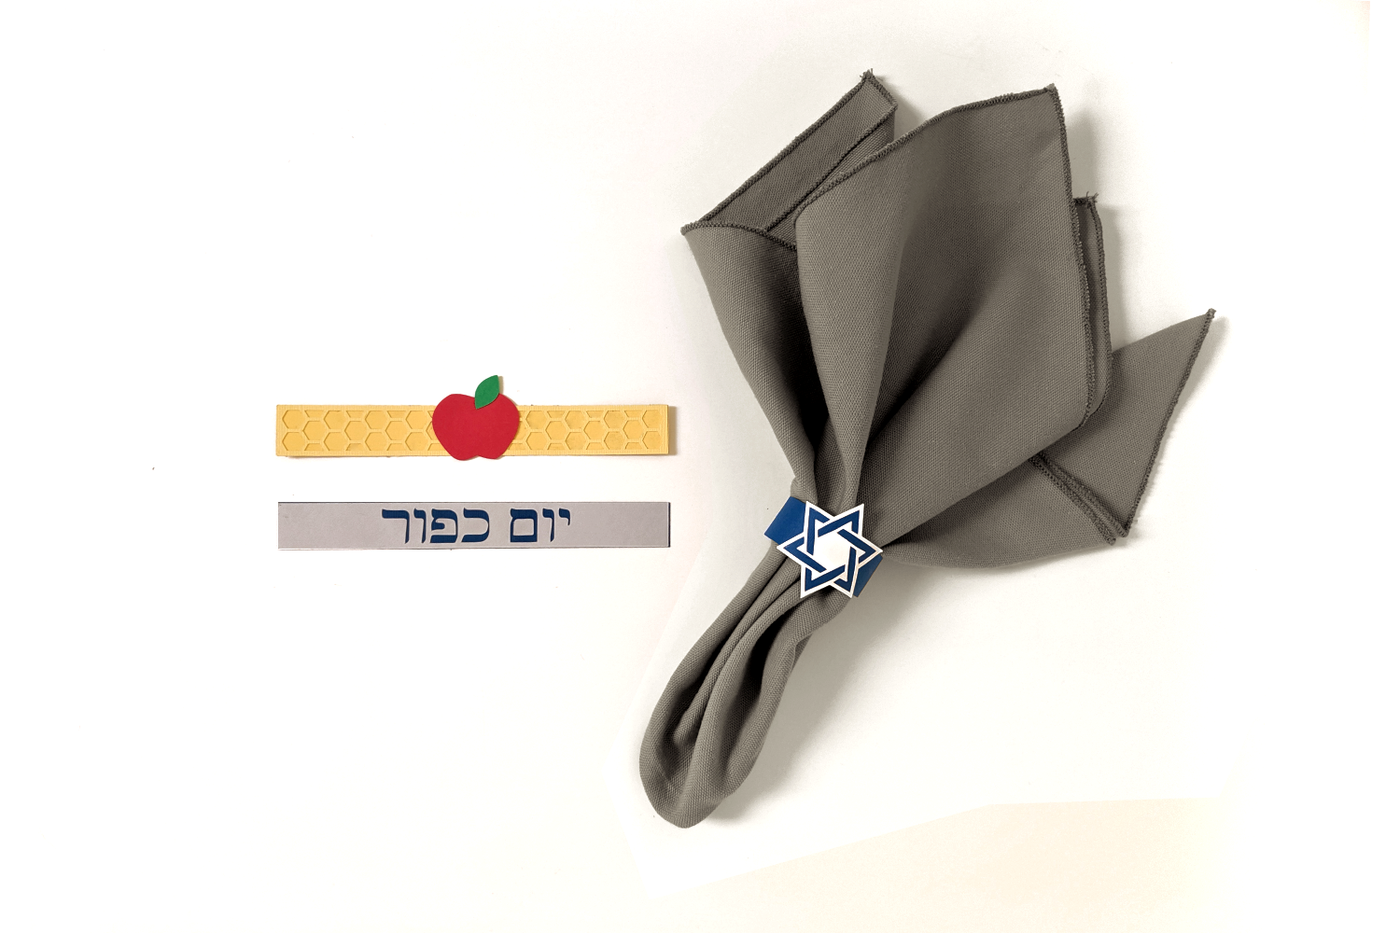 Grey napkin with a paper napkin ring that has a Star of David design. There are 2 more paper napkin rings laid flat nearby. One has an apple and the band looks like honeycomb. The other says "Yom Kippur" in Hebrew letters.